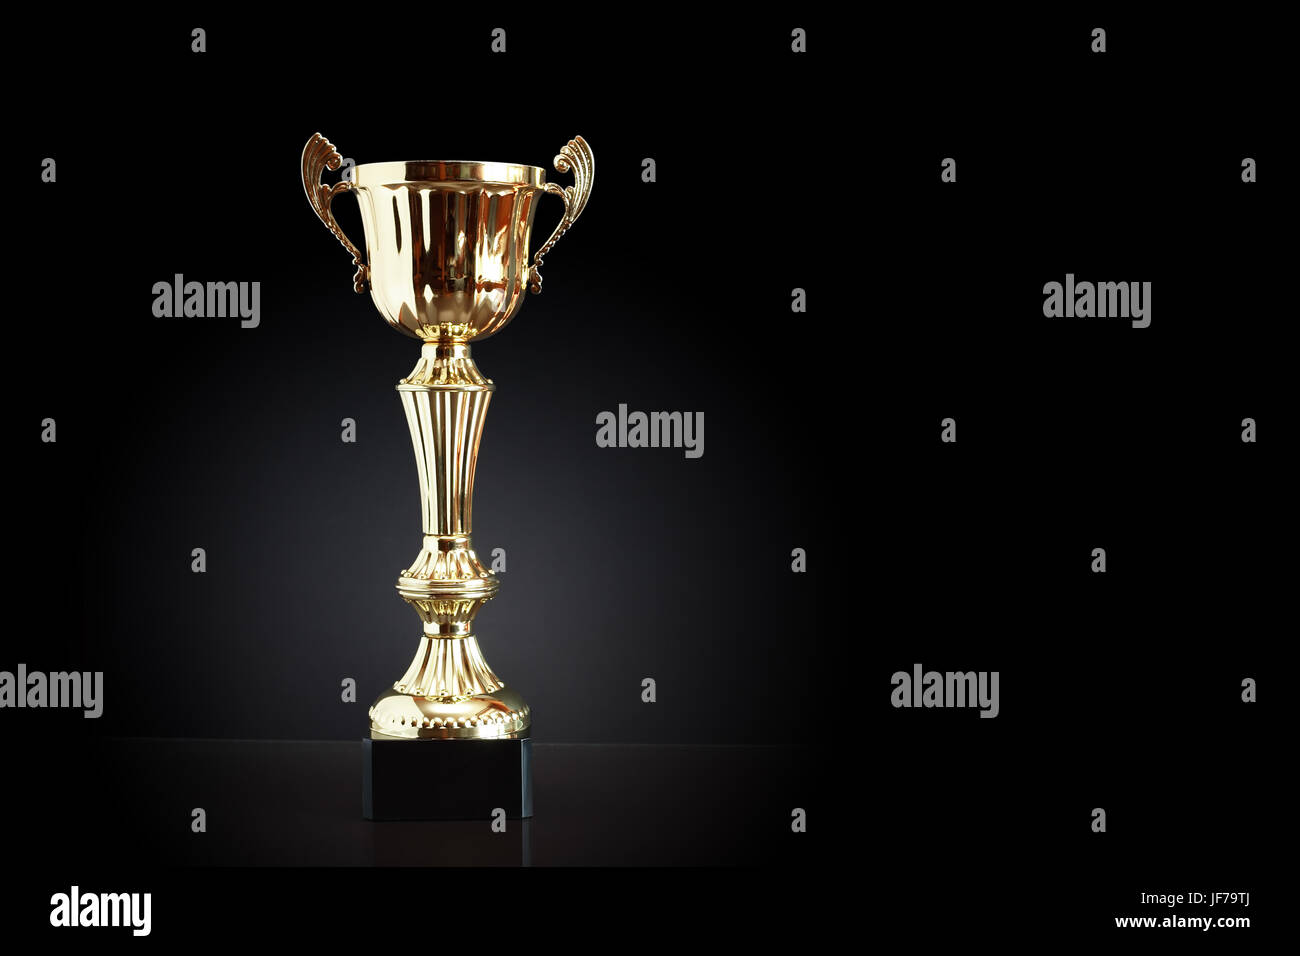 Gold trophy on black background with free space for text Stock Photo